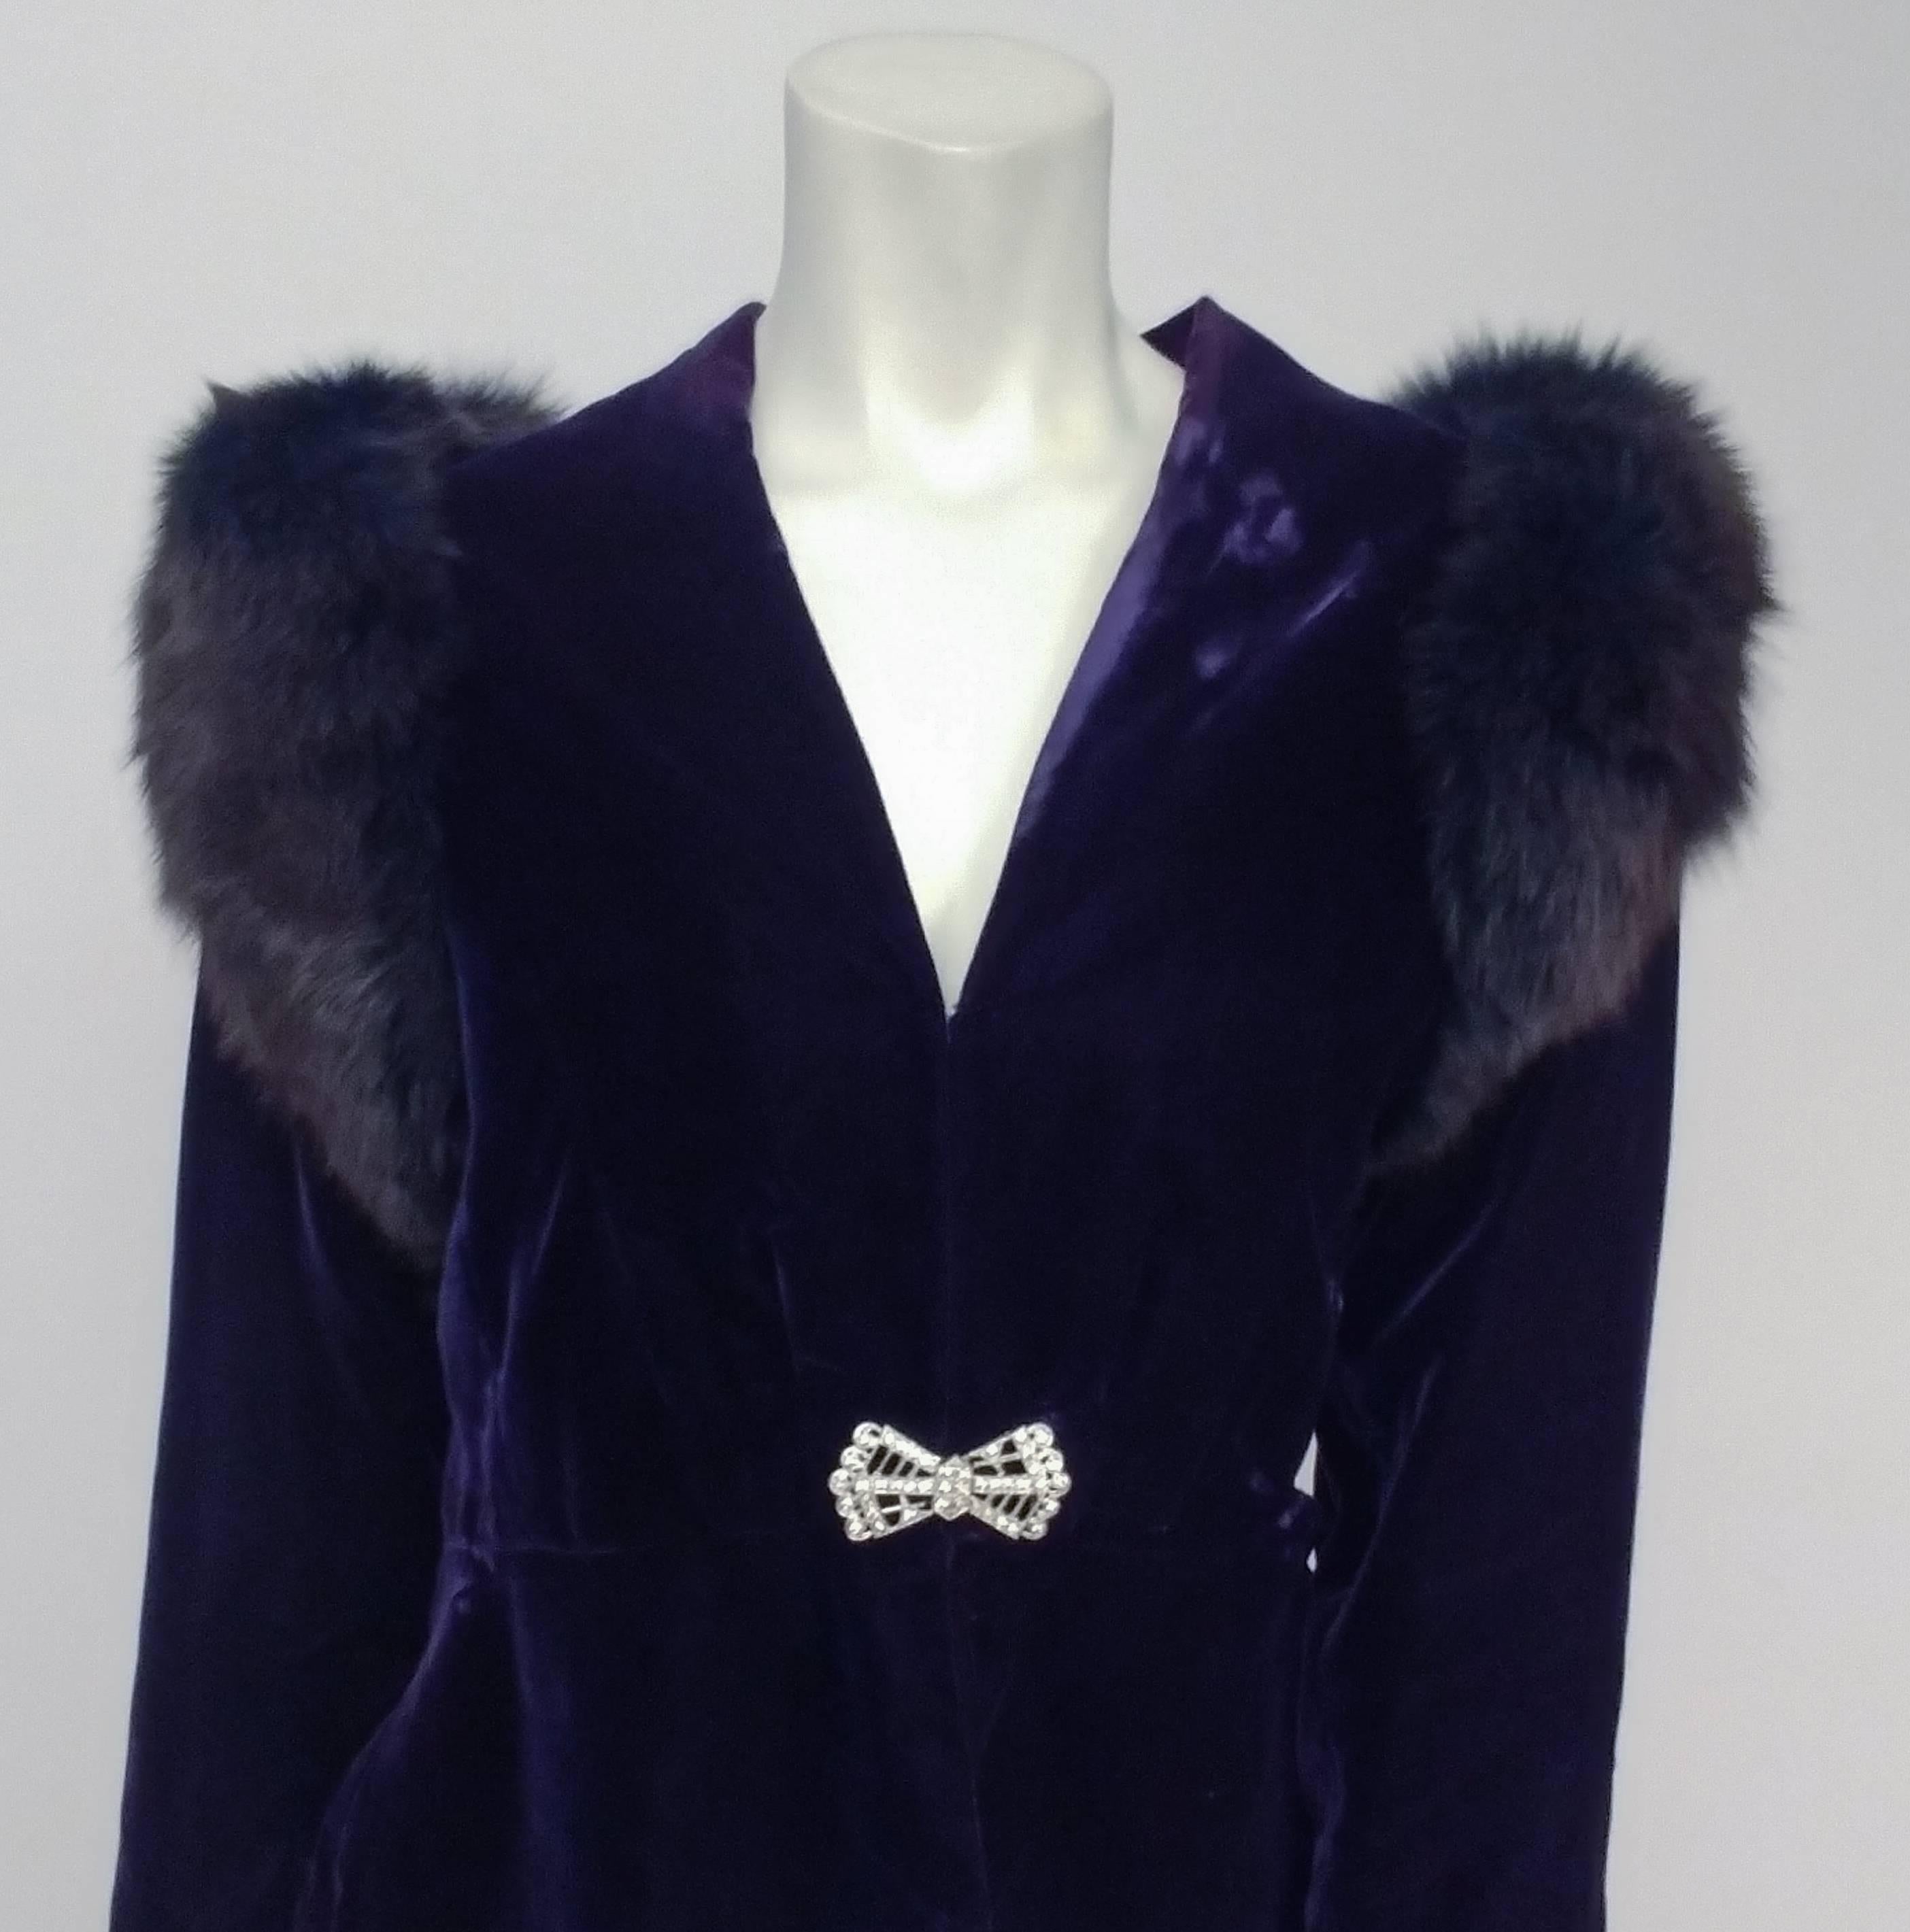 1980s Victor Costa Fox Trim Blue Velvet Jacket. Hooks closed with rhinestone clasp at waist, and can be hooked closed with additional hook and eyes higher up the front. Dyed blue fox trim at shoulders. 